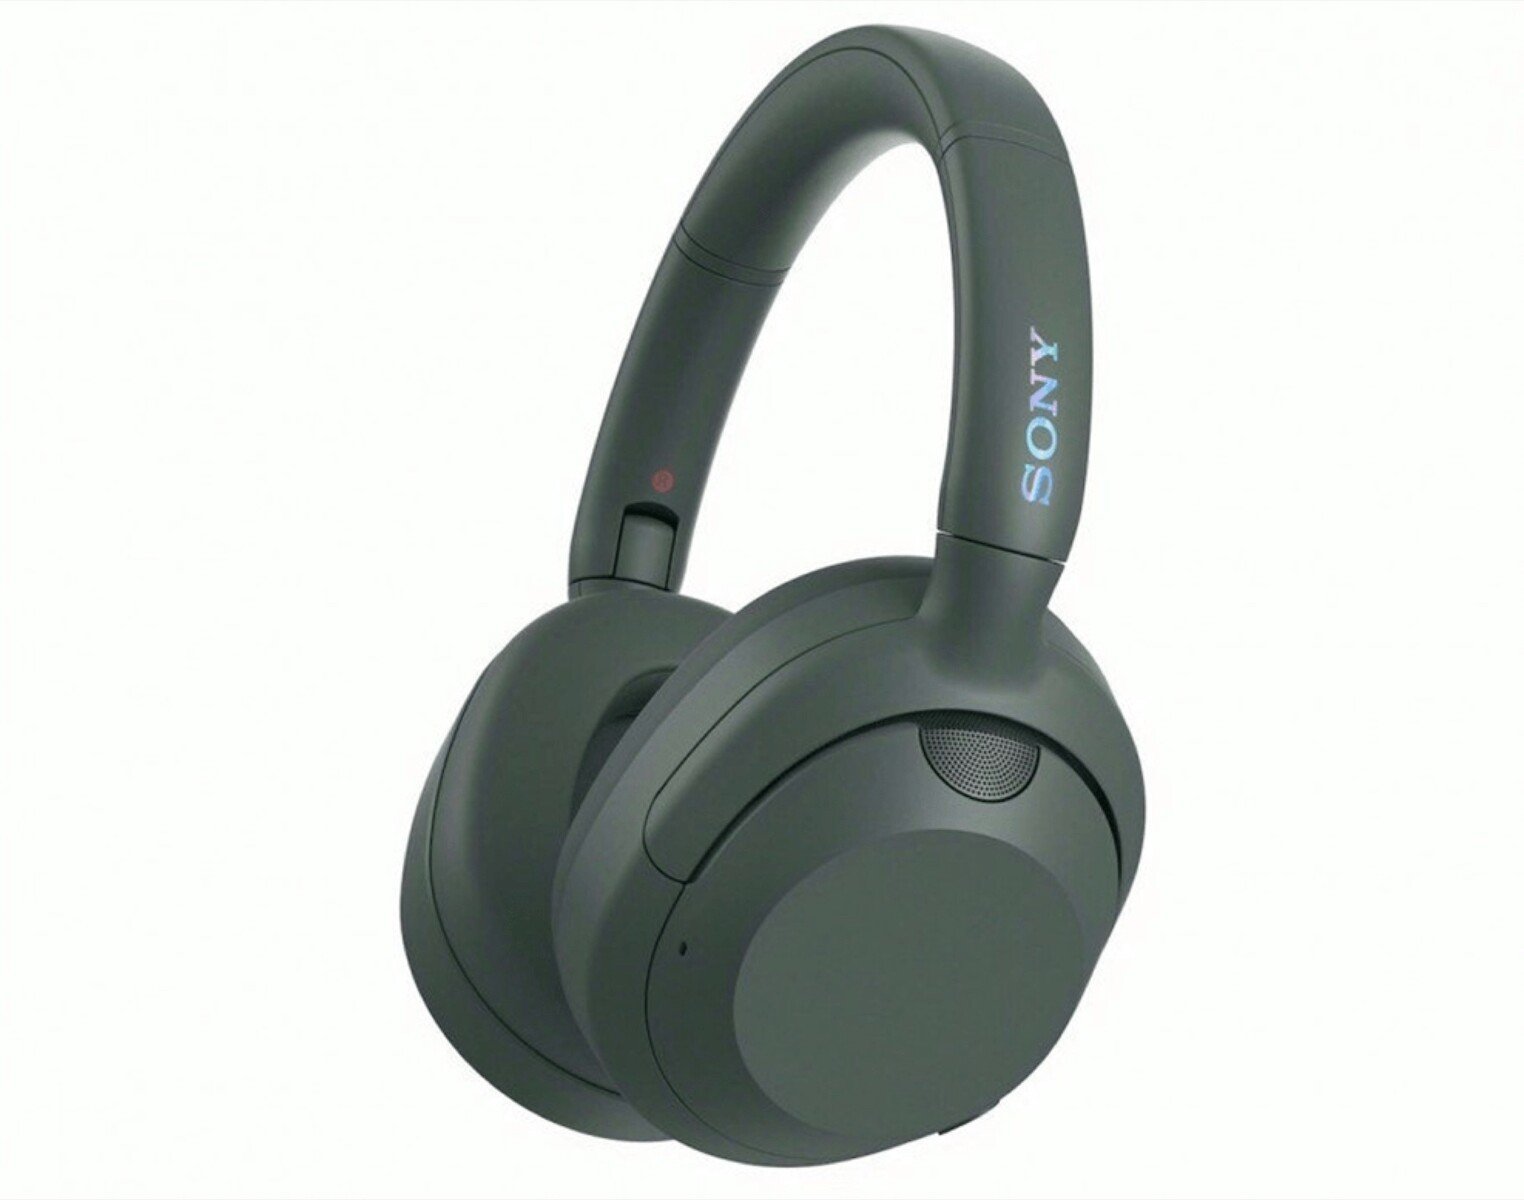 Sony WH-ULT900N mid-range headphones leaked, will offer many premium features - News - News